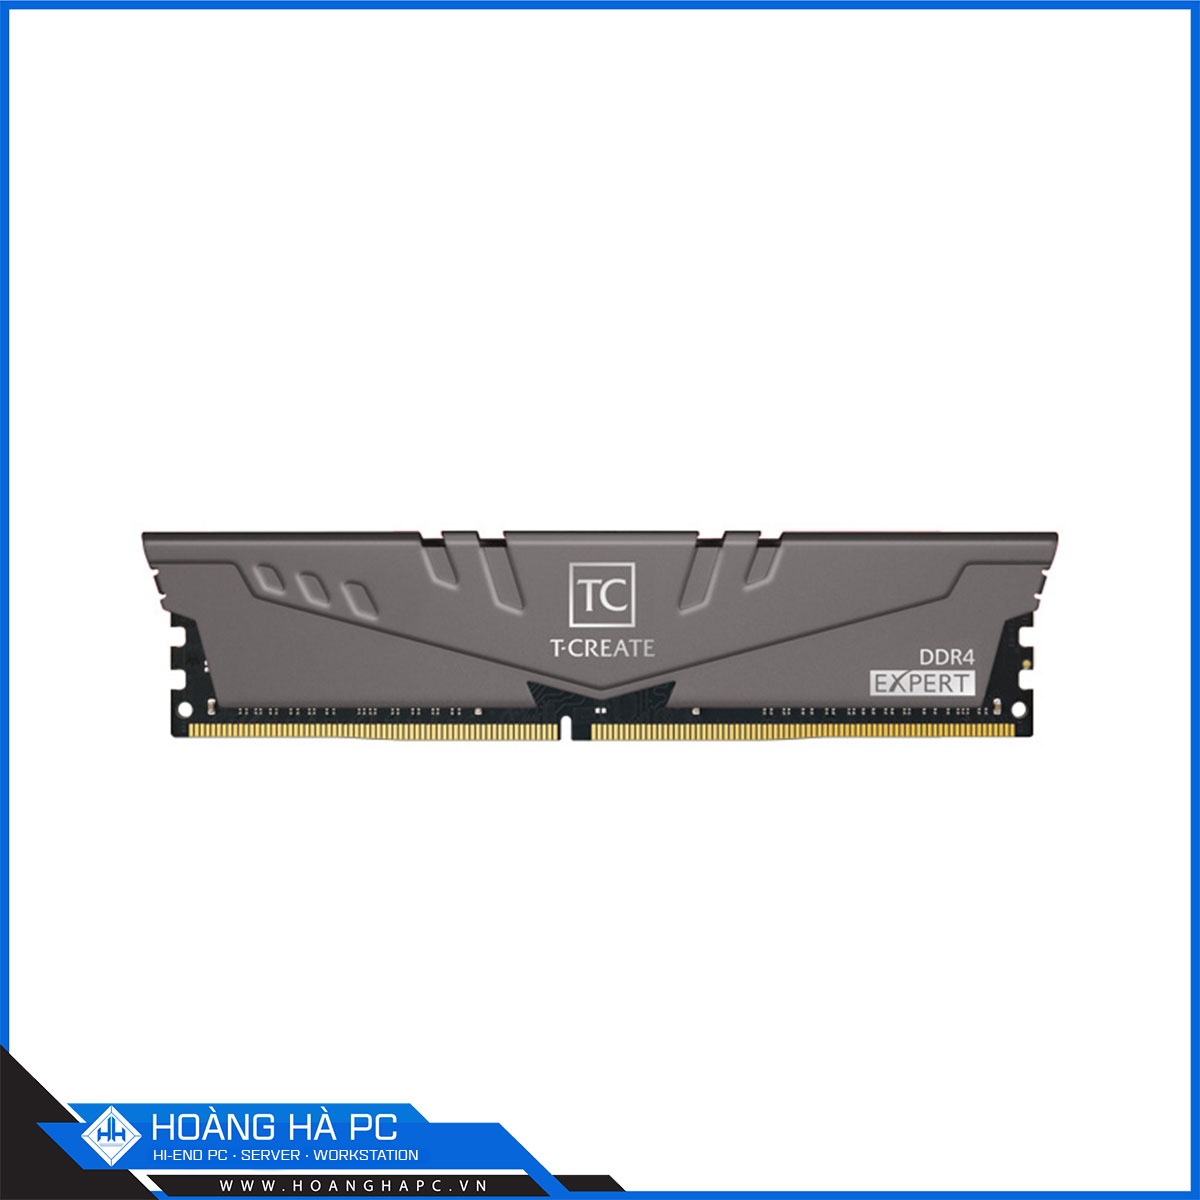 TEAMGROUP T-CREATE EXPERT 32GB (2x16GB) DDR4 3200MHz